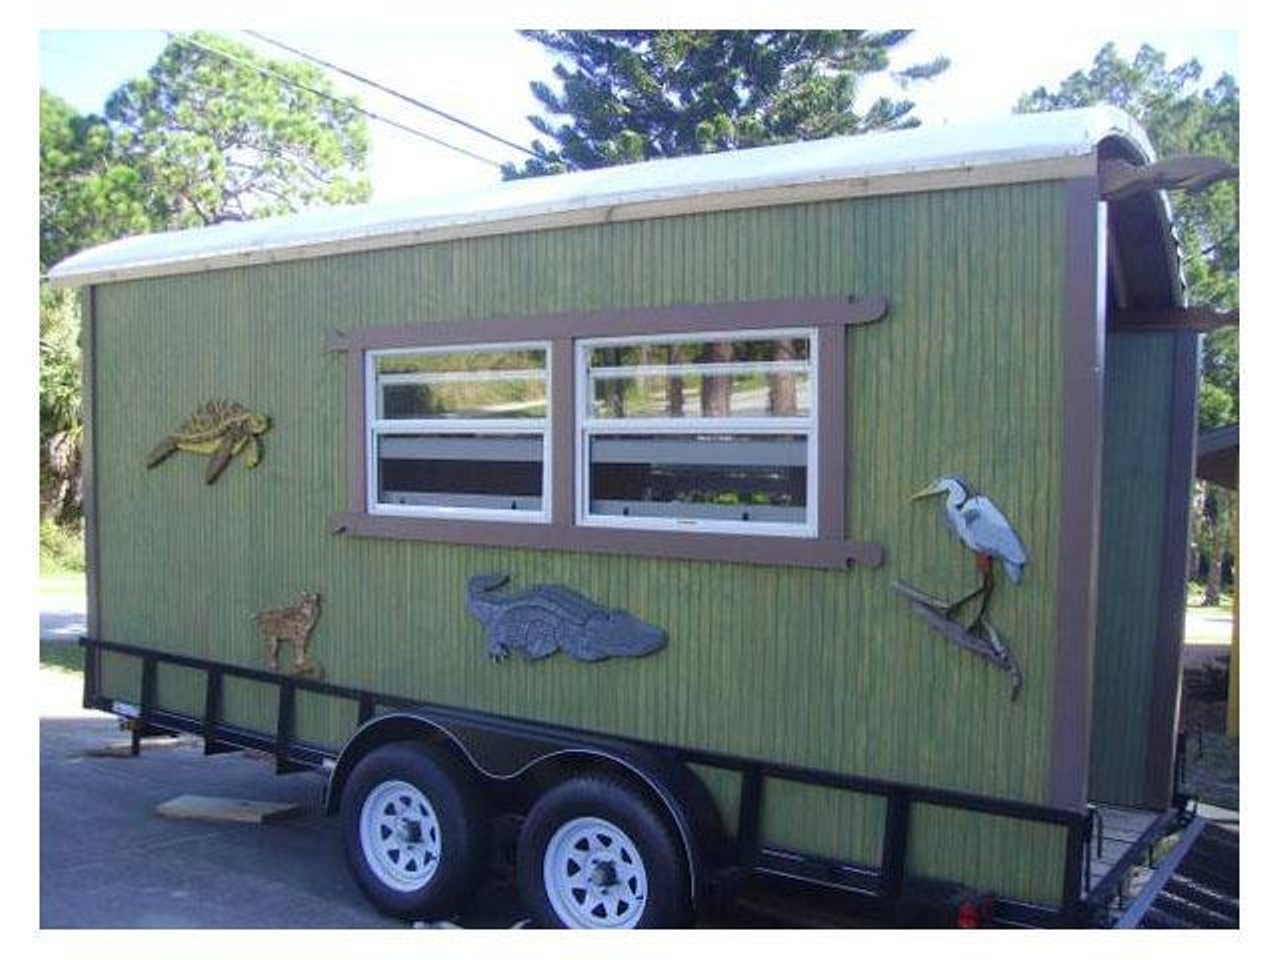 Ocean-themed Gypsy Wagon
Location: Englewood
Price: $8000
Size: 98 sq ft
If you buy this you can remove the animal stuff.